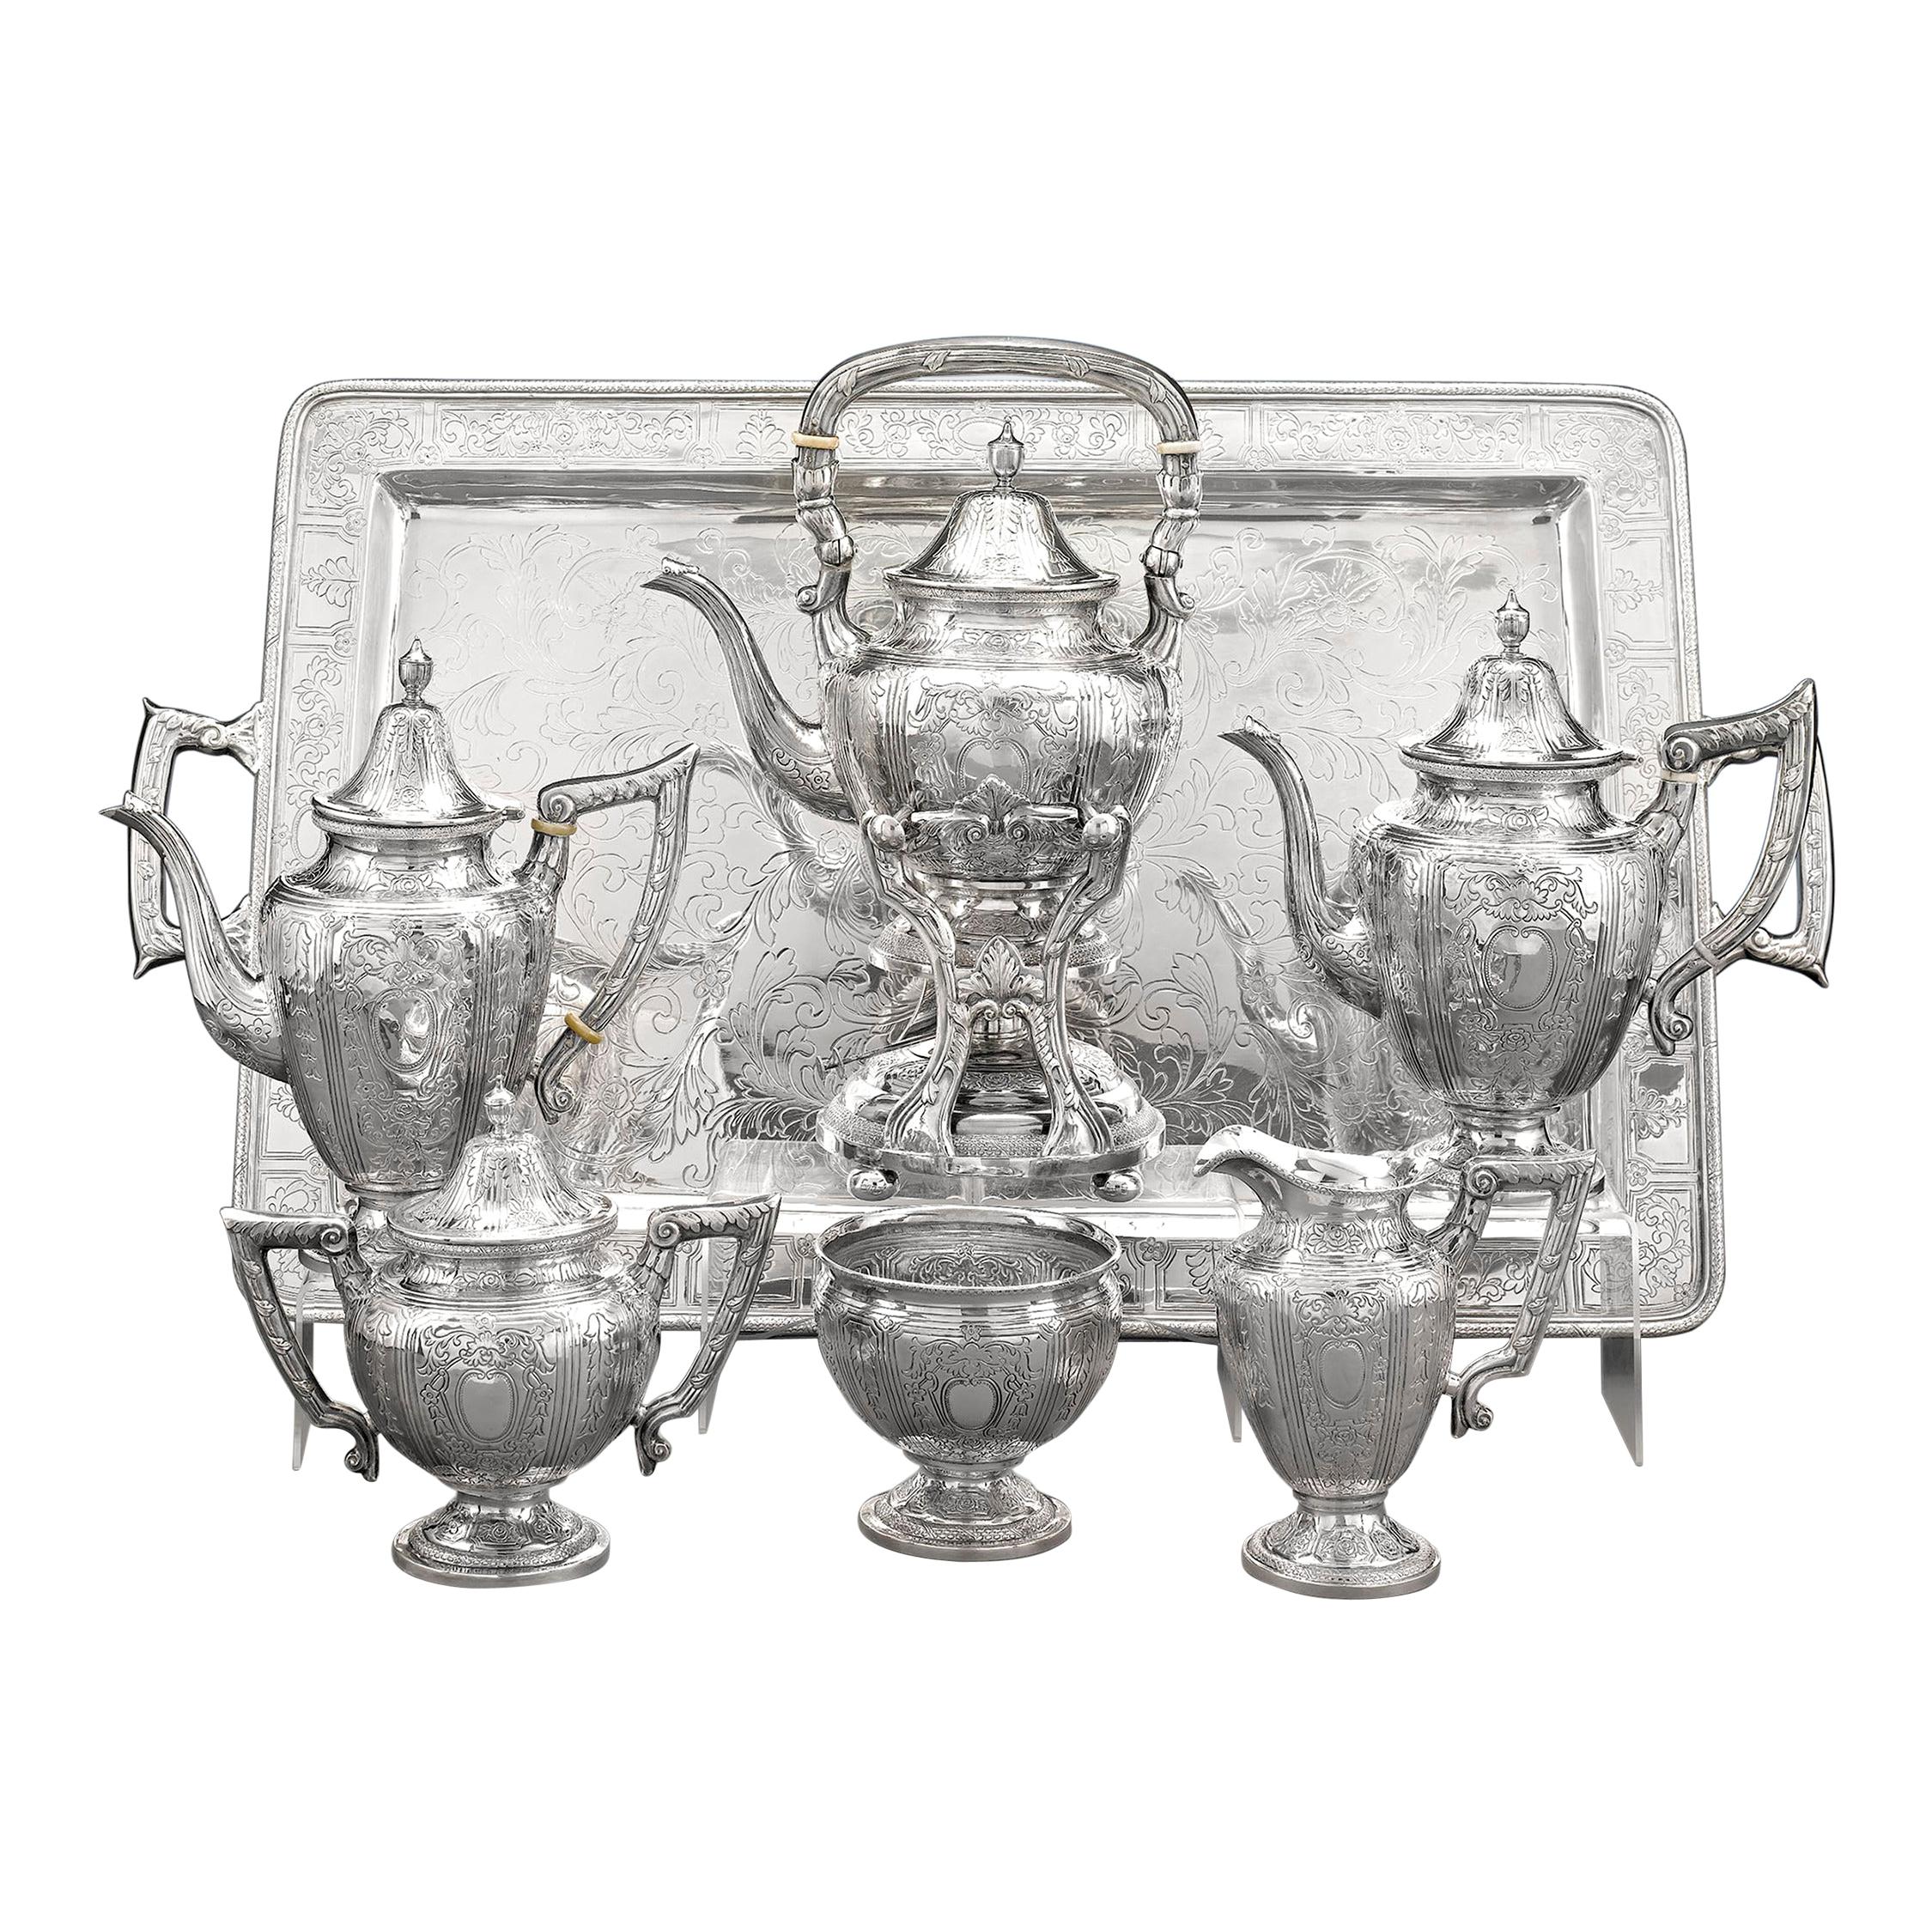 Chinese Export Silver Tea and Coffee Service For Sale